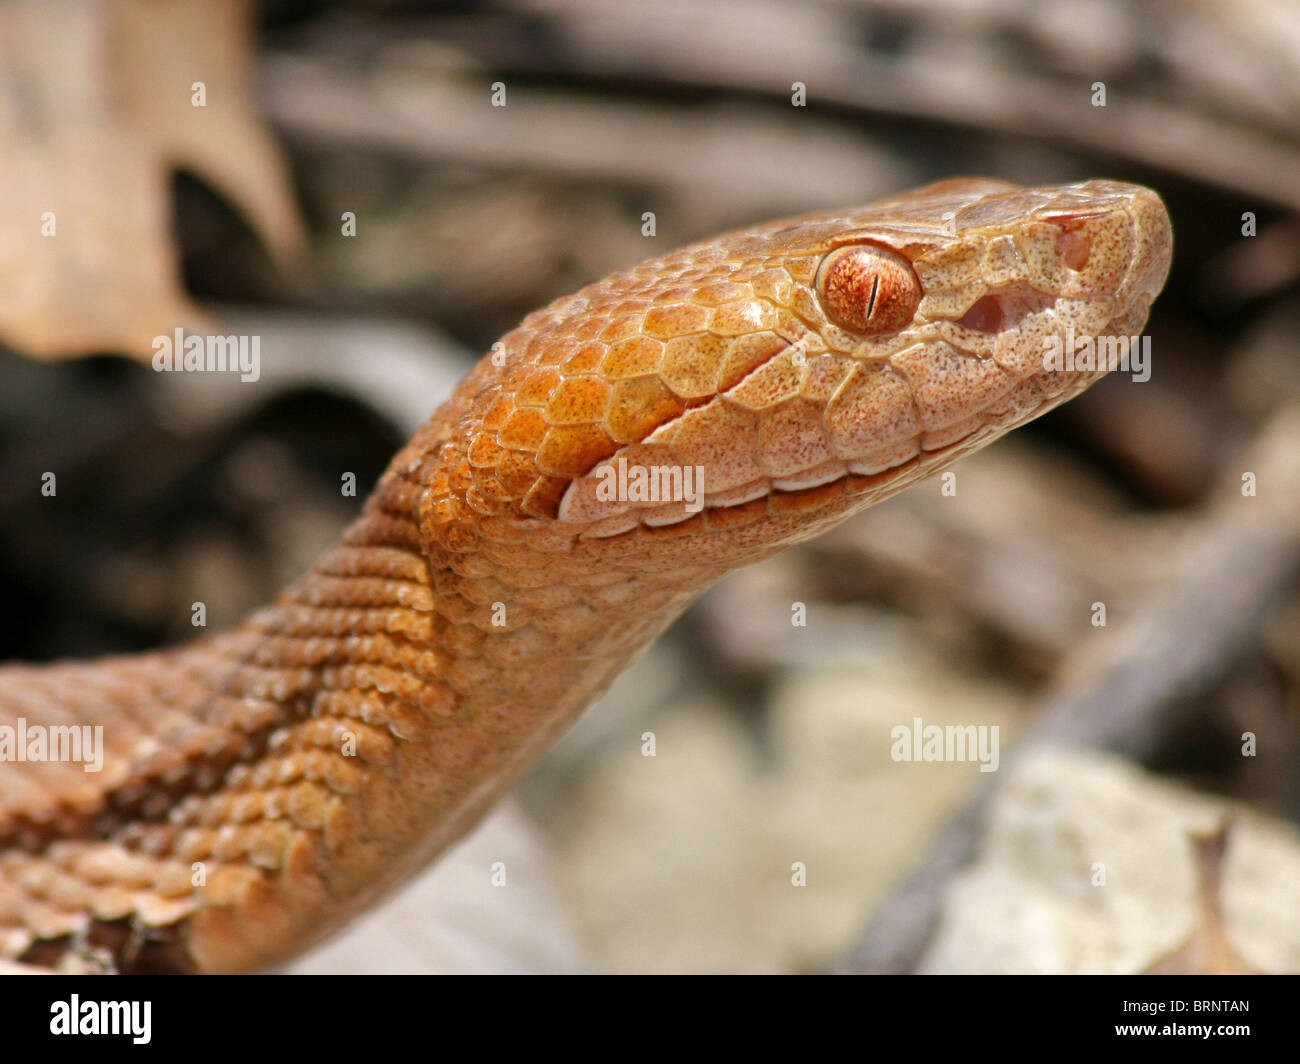 Close-up study of a Northern Copperhead Snake (Agkistrodon contortrix mokasen) in Illinois Stock Photo